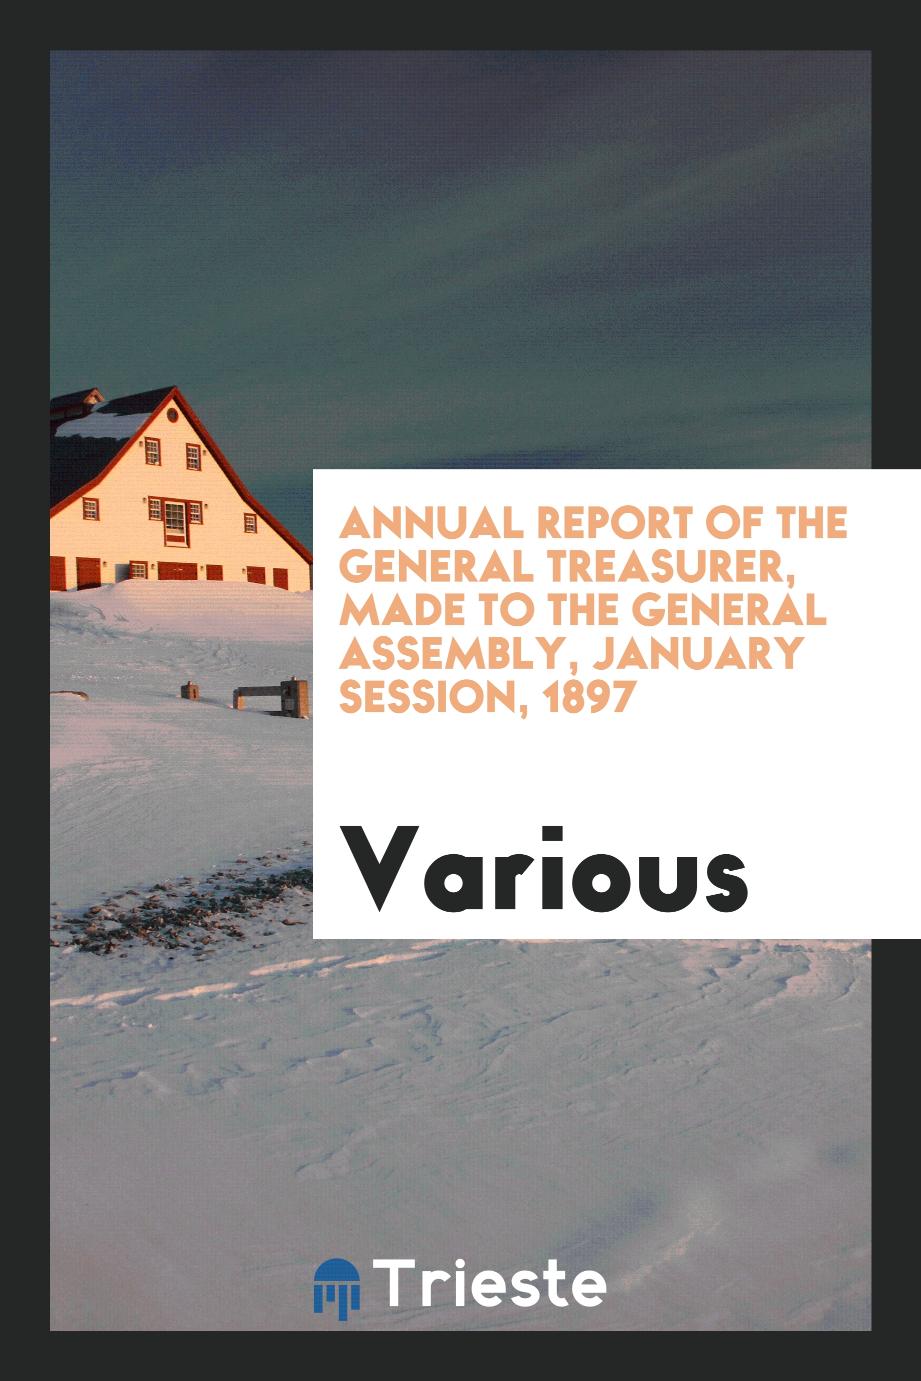 Annual Report of the General Treasurer, Made to the General Assembly, January session, 1897